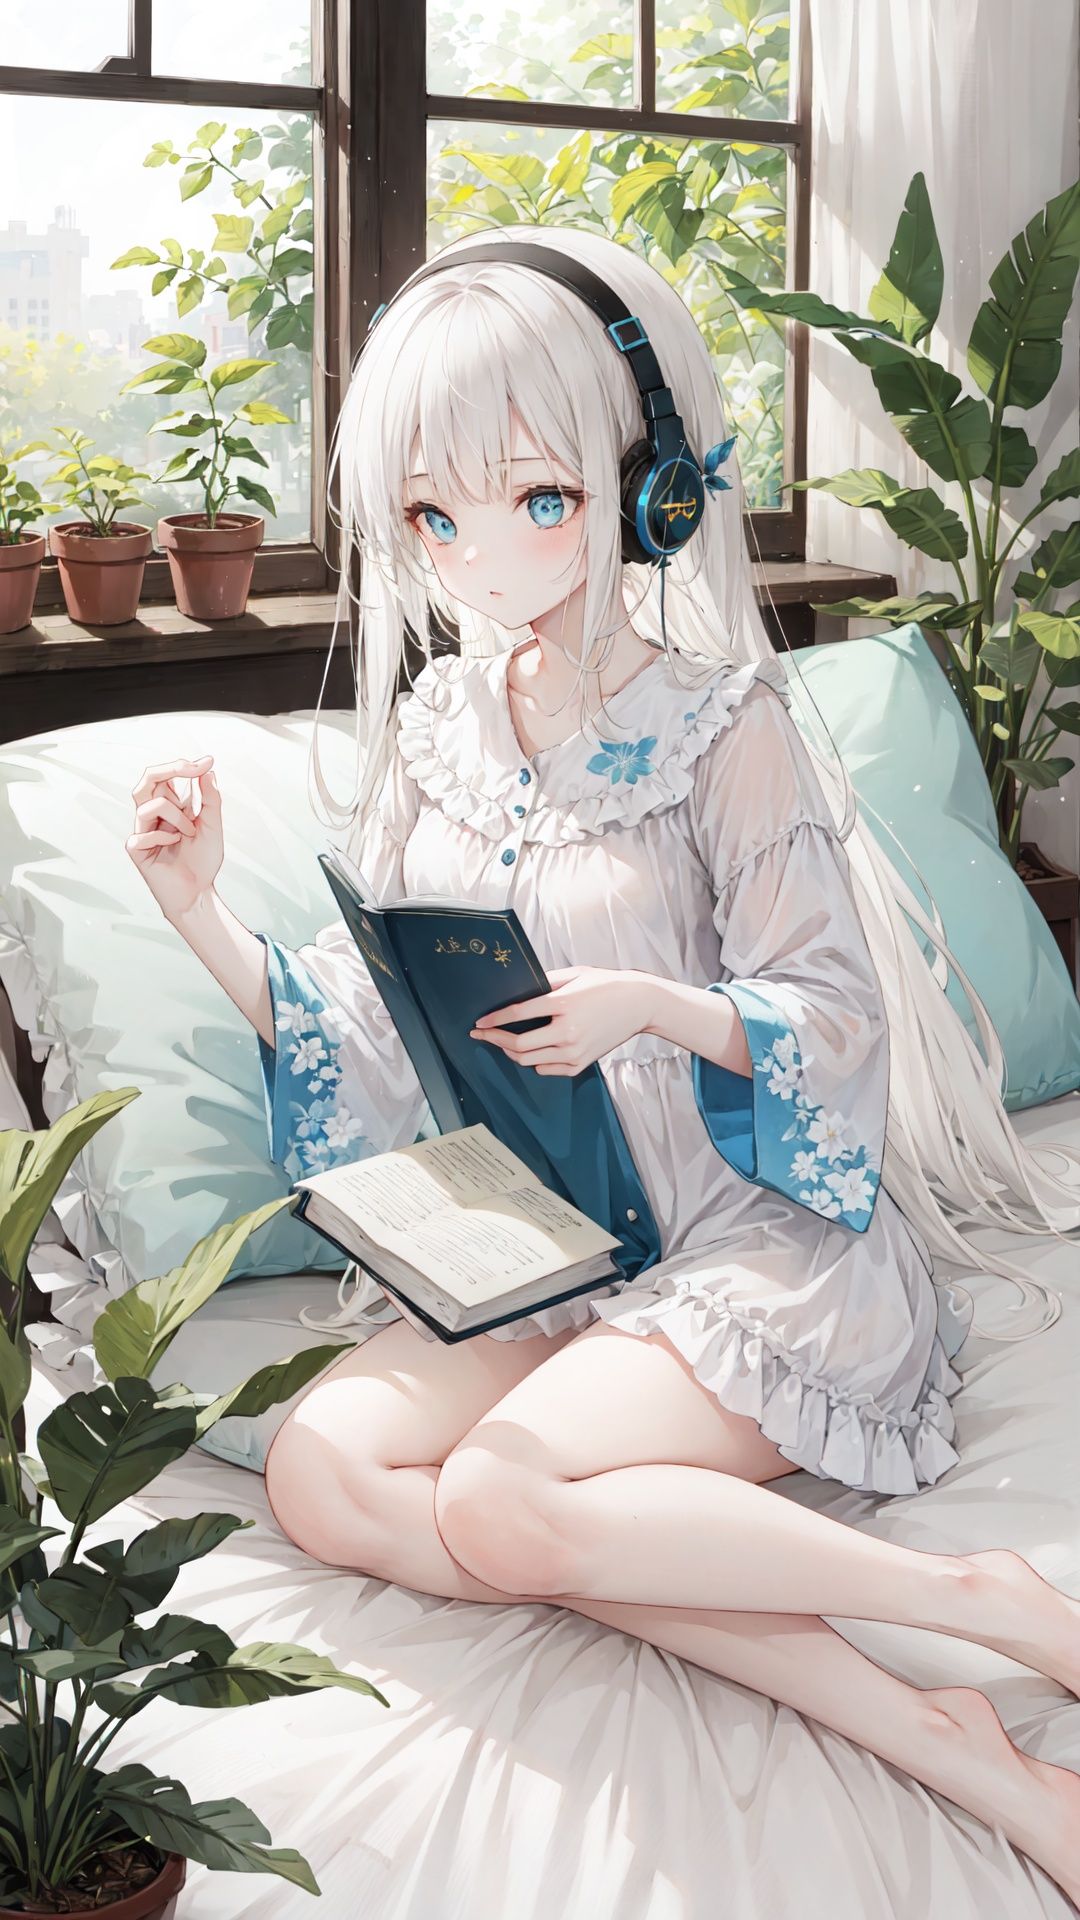 extremely delicate and beautiful,
depth of field, amazing, masterpiece, growth, visual impact,
ultra-detailed,

1girl, long_hair, window, book, pillow, barefoot, solo, plant, very_long_hair, indoors, potted_plant, headphones, cup,
gorgeous, fantasism, nature, refined rendering, original, contour deepening, high-key and low-variance brightness scale, soft light, light and dark interlaced